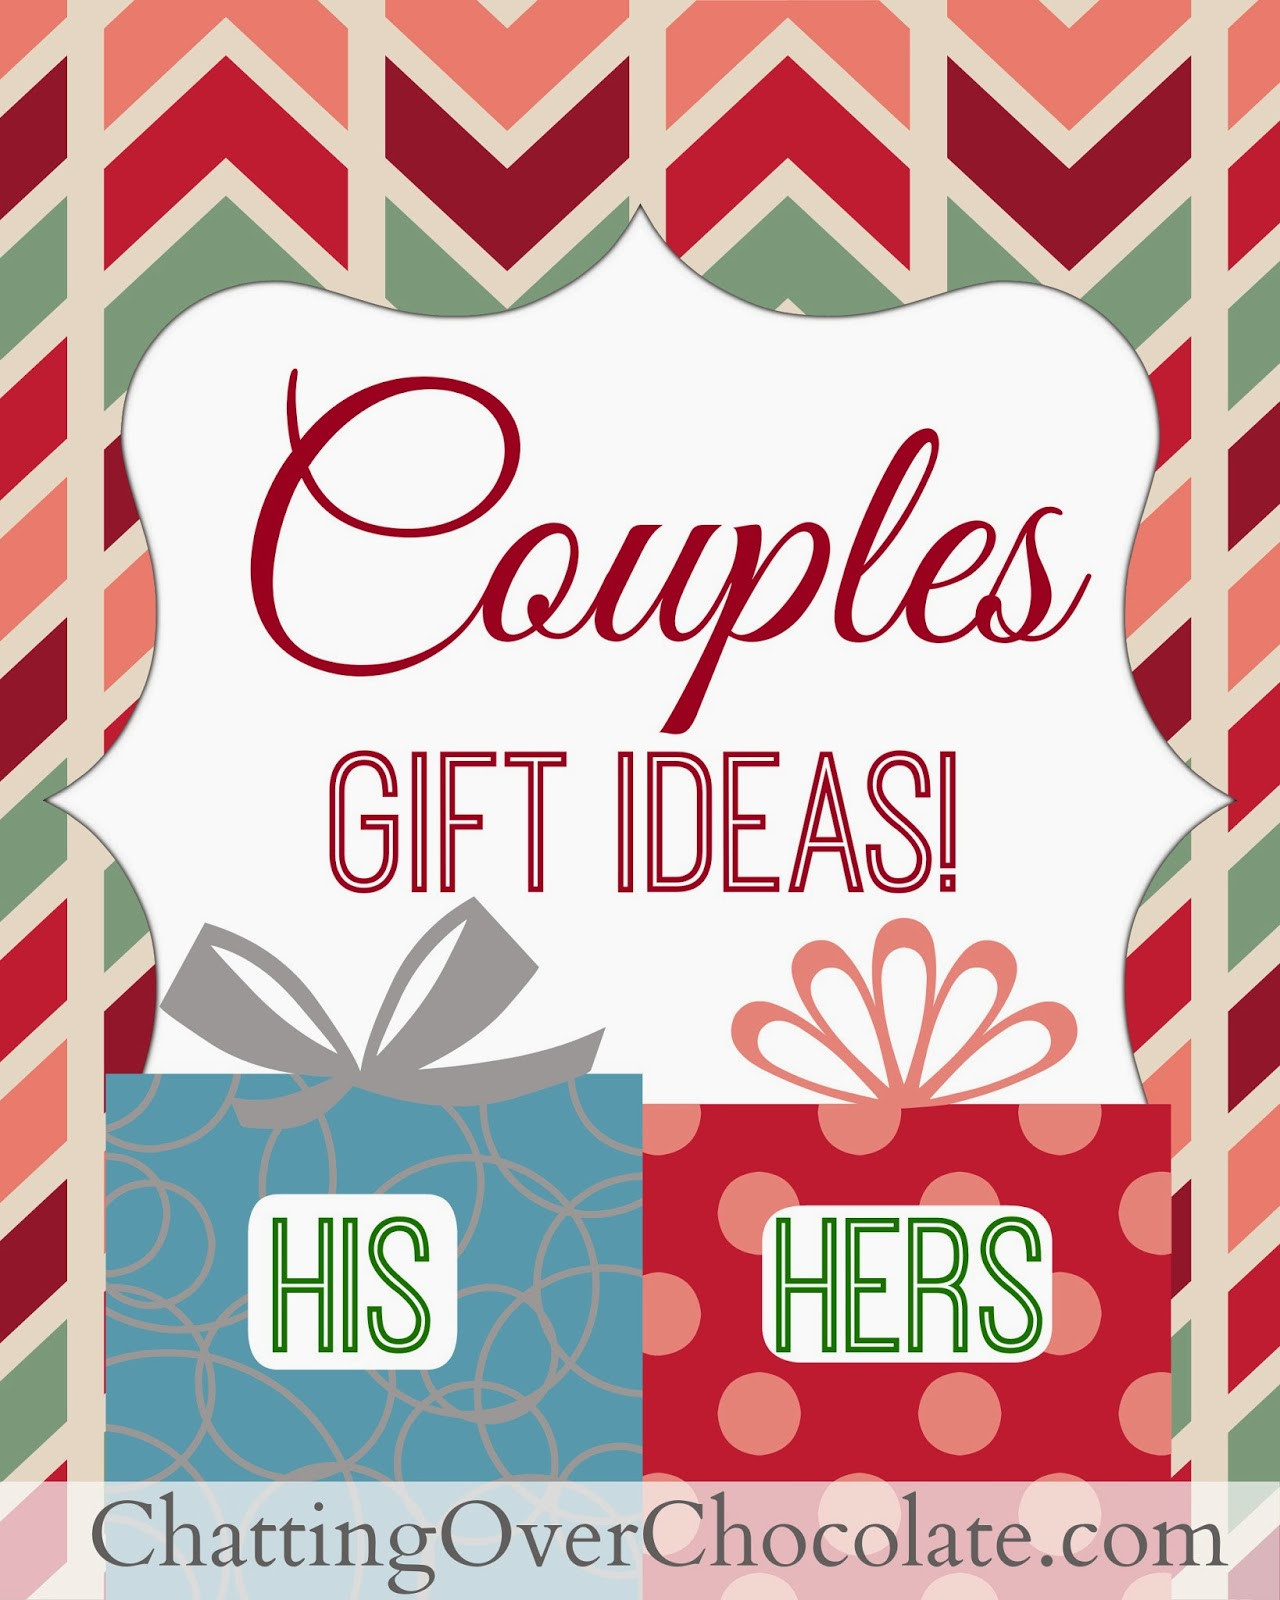 Gift Ideas Couples
 Chatting Over Chocolate His & Hers Gift Ideas Couples